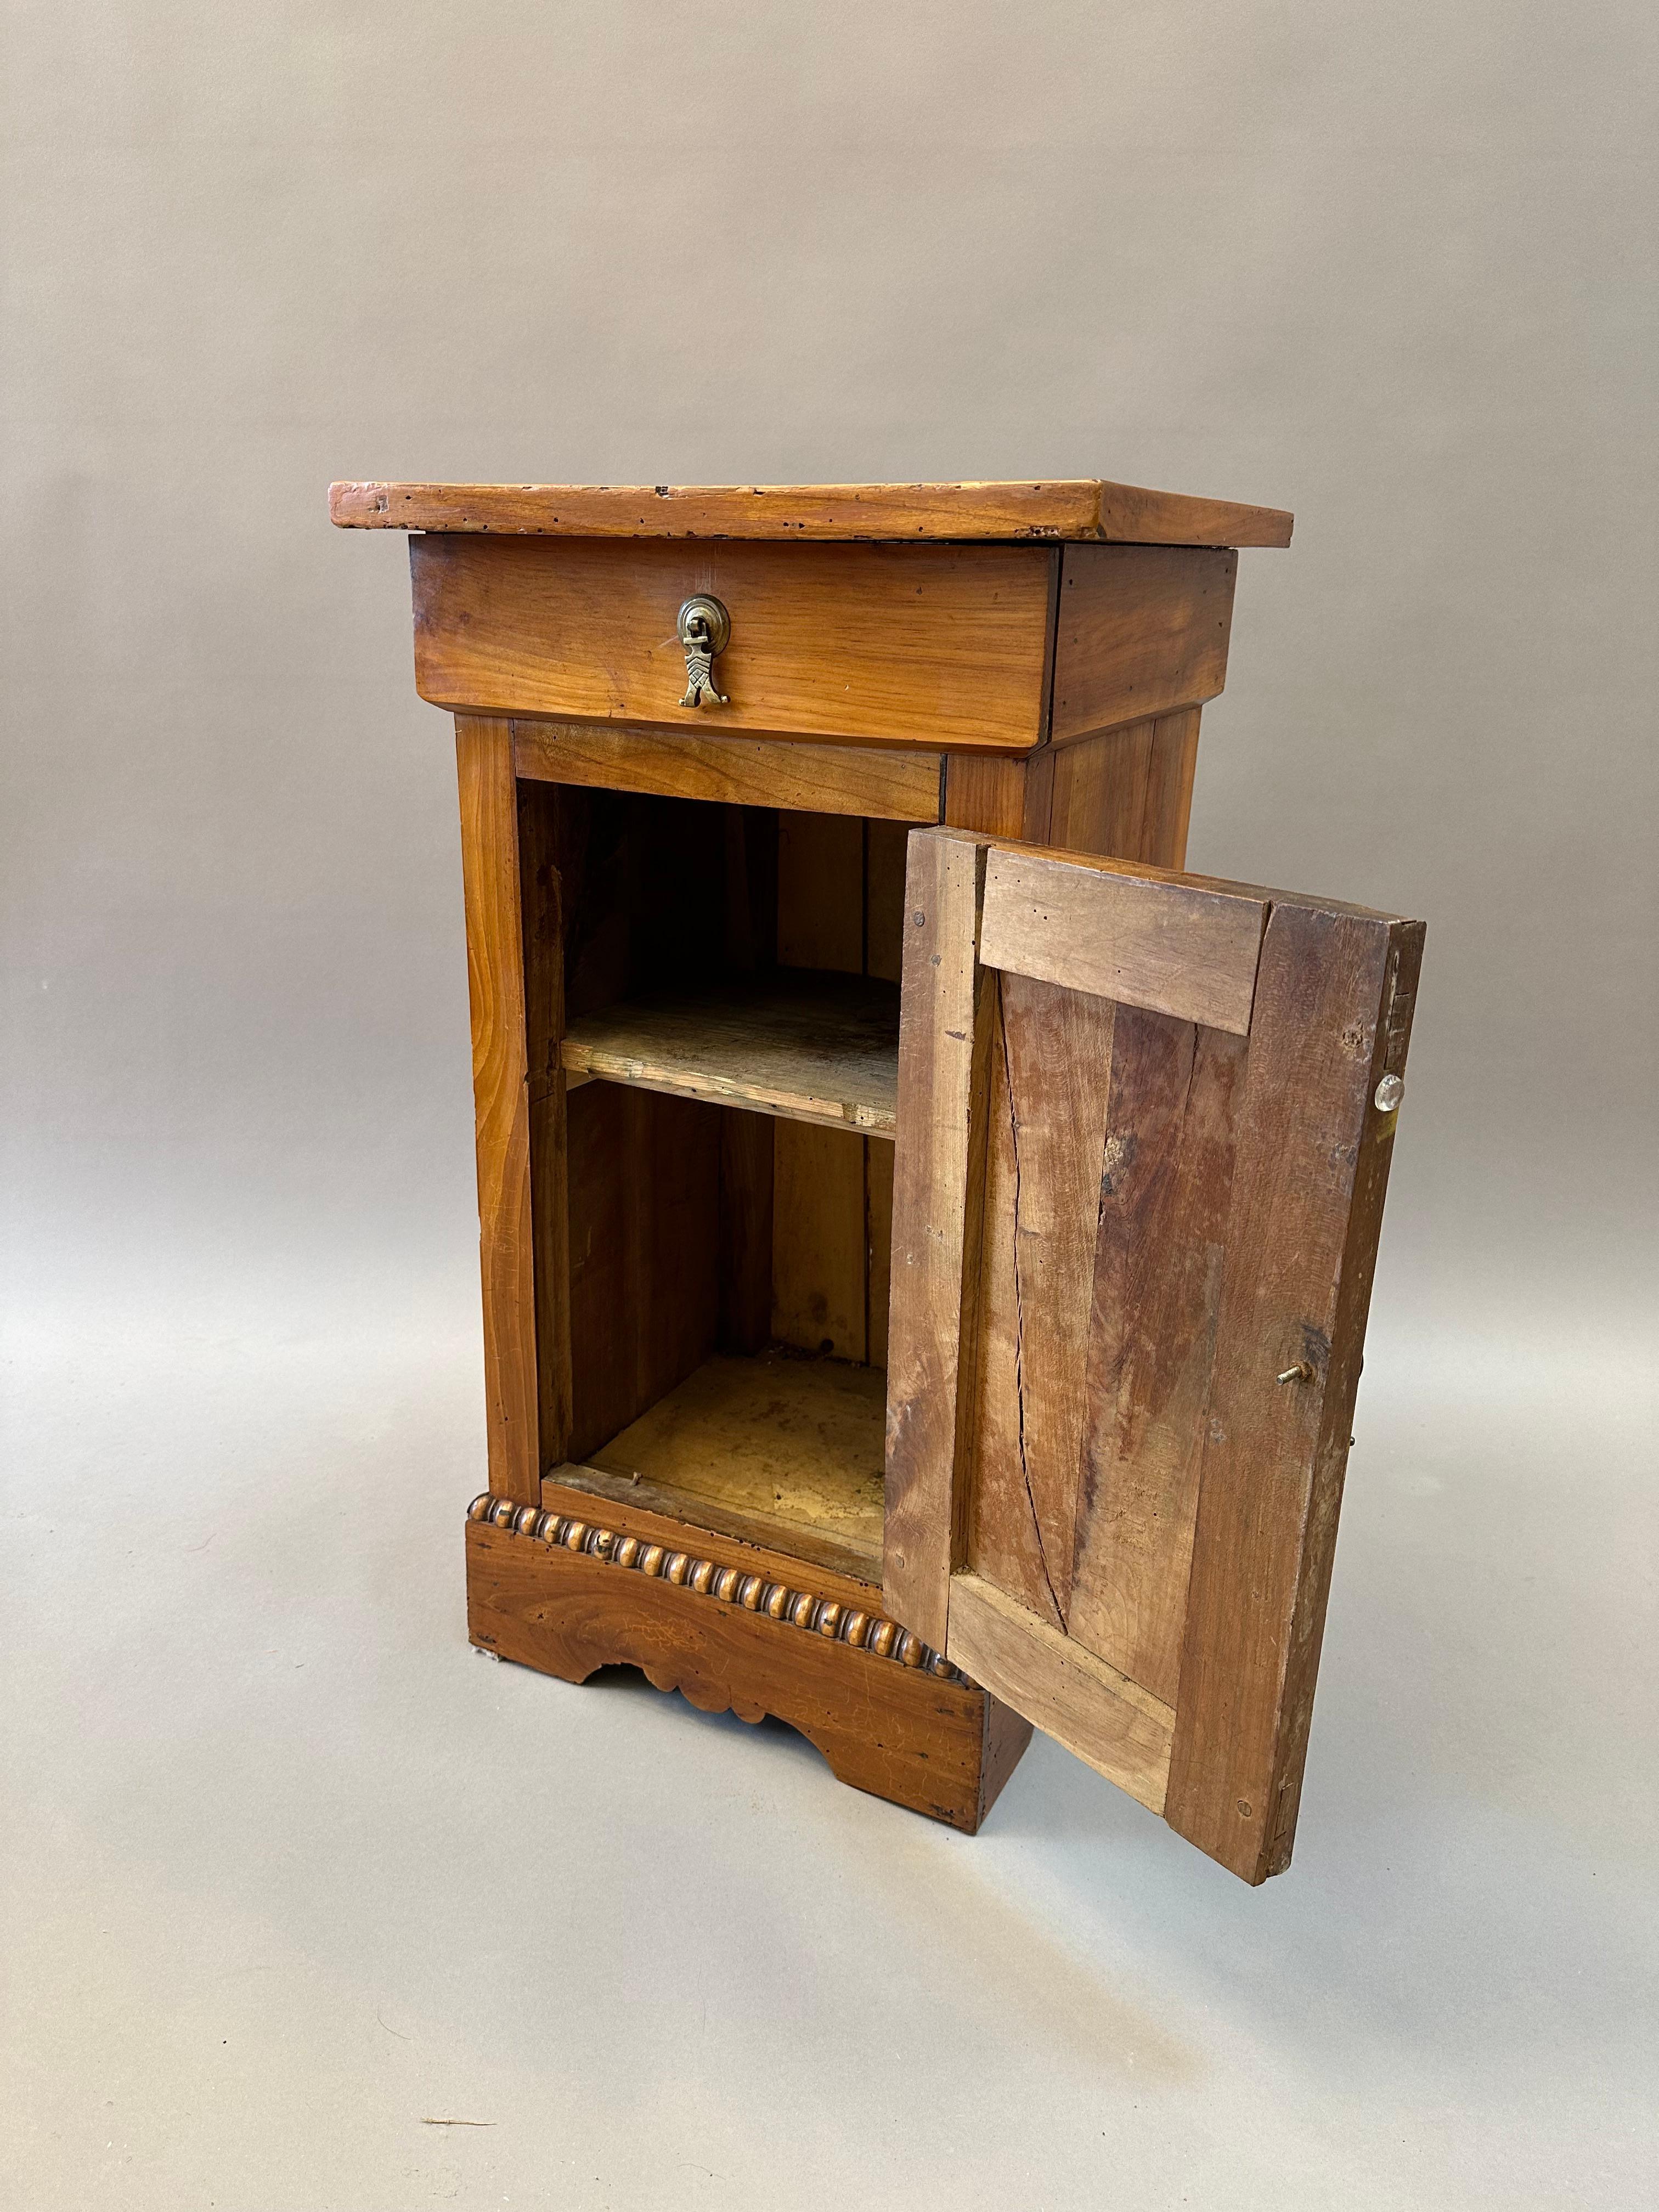 Small French Provincial Charles X Cabinet or Night Stand. Made of Pearwood with and Inlaid Geometric Top over a single Drawer with a “Book-matched” Cupboard Door above Molded and Shaped Bracket Feet. Made in Normandy circa 1820.